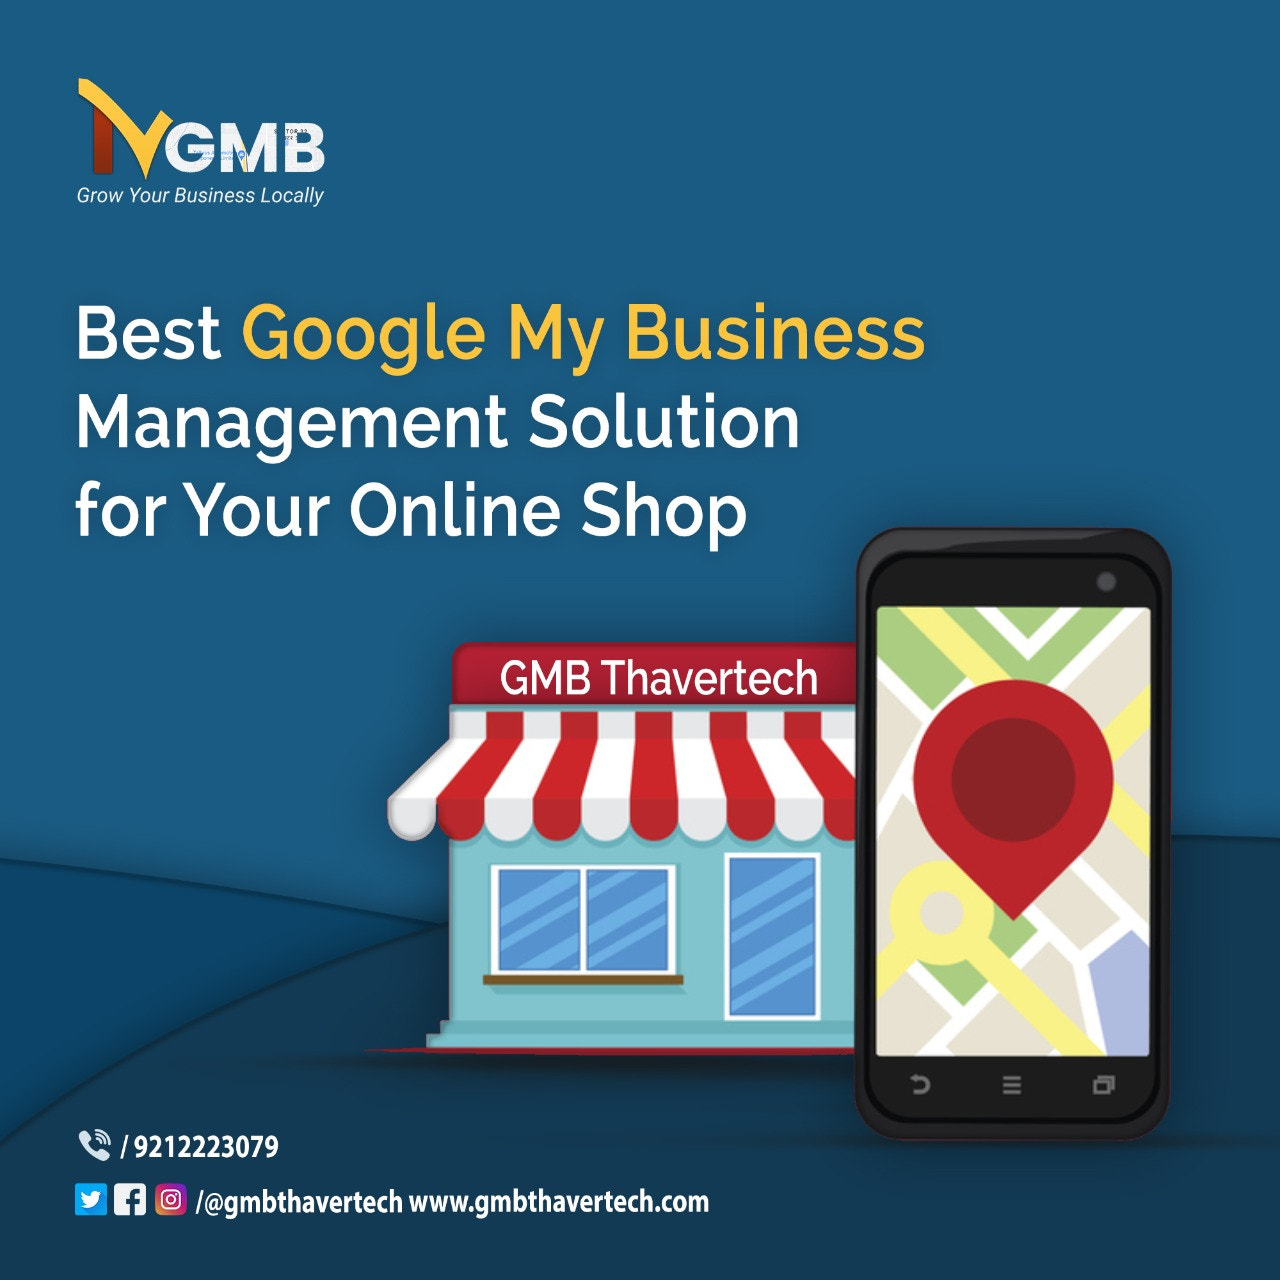 GMB Management Solution by GMB Thavertech